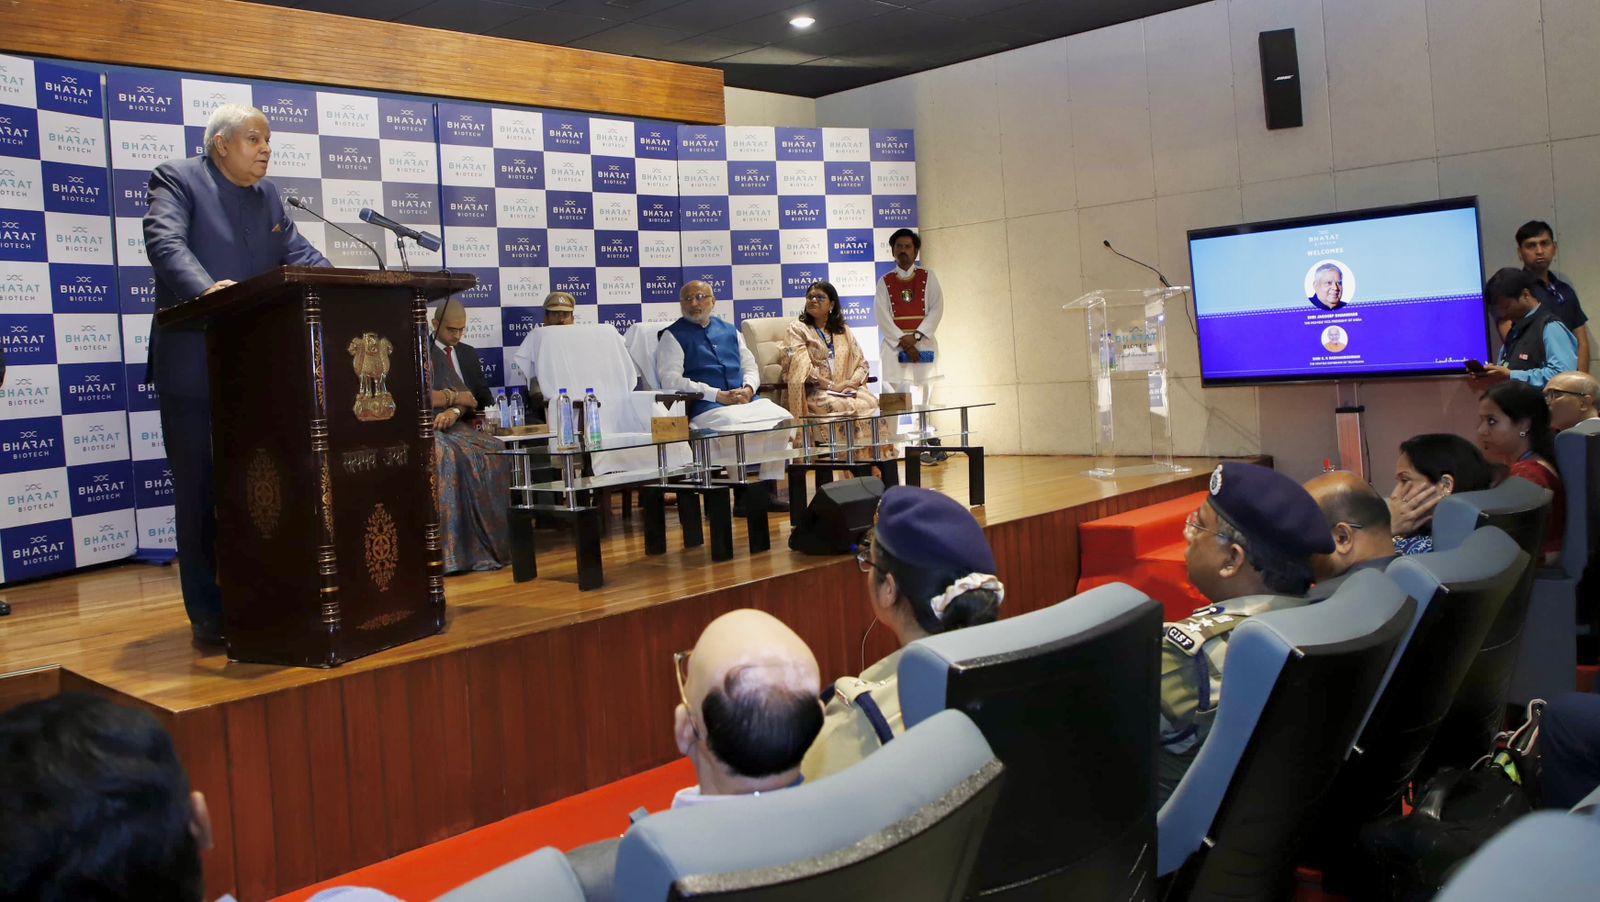 The Vice-President, Shri Jagdeep Dhankhar addressing the scientific community at the Bharat Biotech facility at Genome Valley in Hyderabad, Telangana on April 26, 2024.